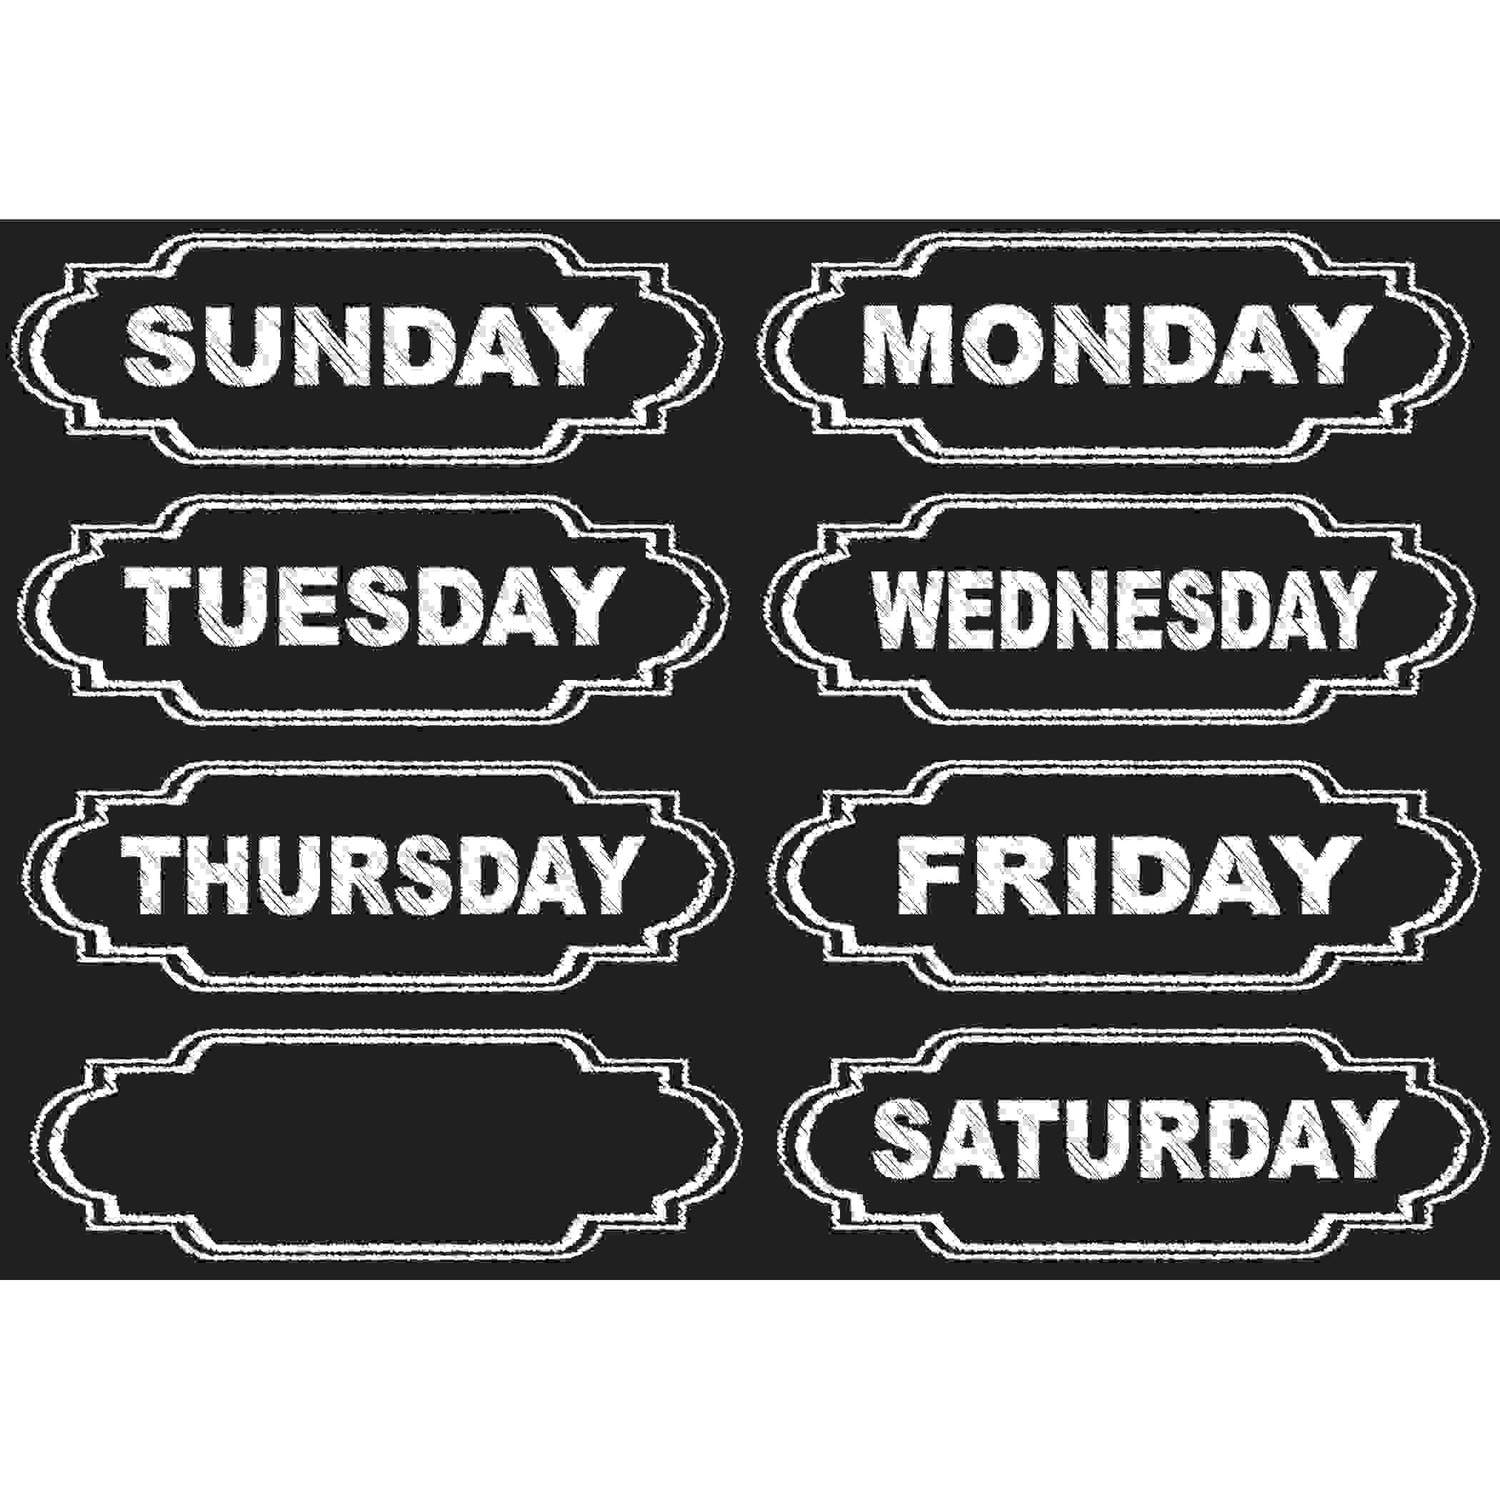 Die-Cut Magnets, Chalkboard Days of the Week, 8 Pieces